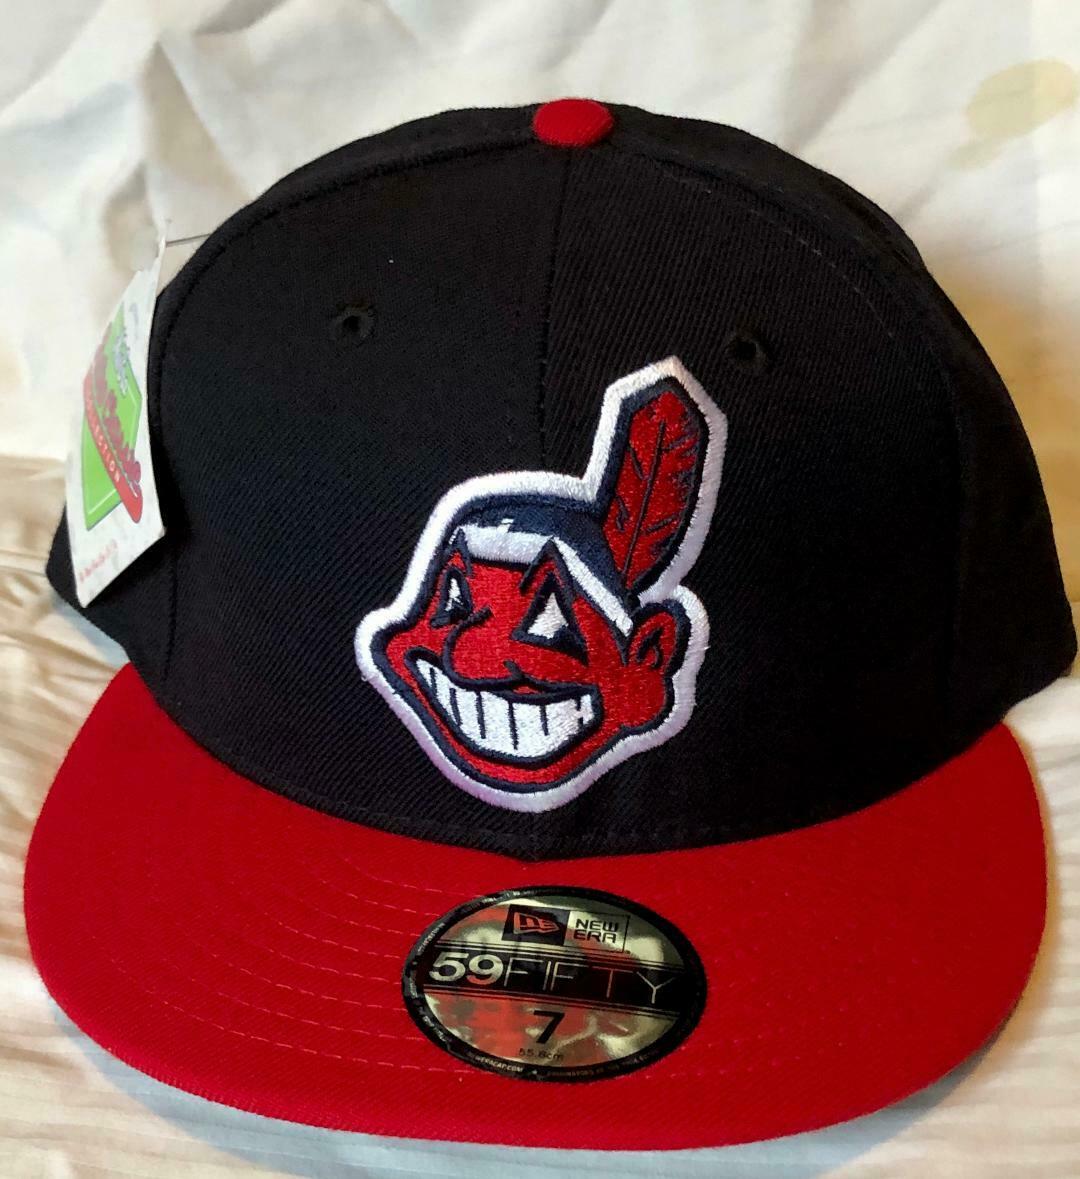 Cleveland Indians Mlb New Era 59fifty Retro Chief Wahoo Logo Fitted Hat/cap Nwt